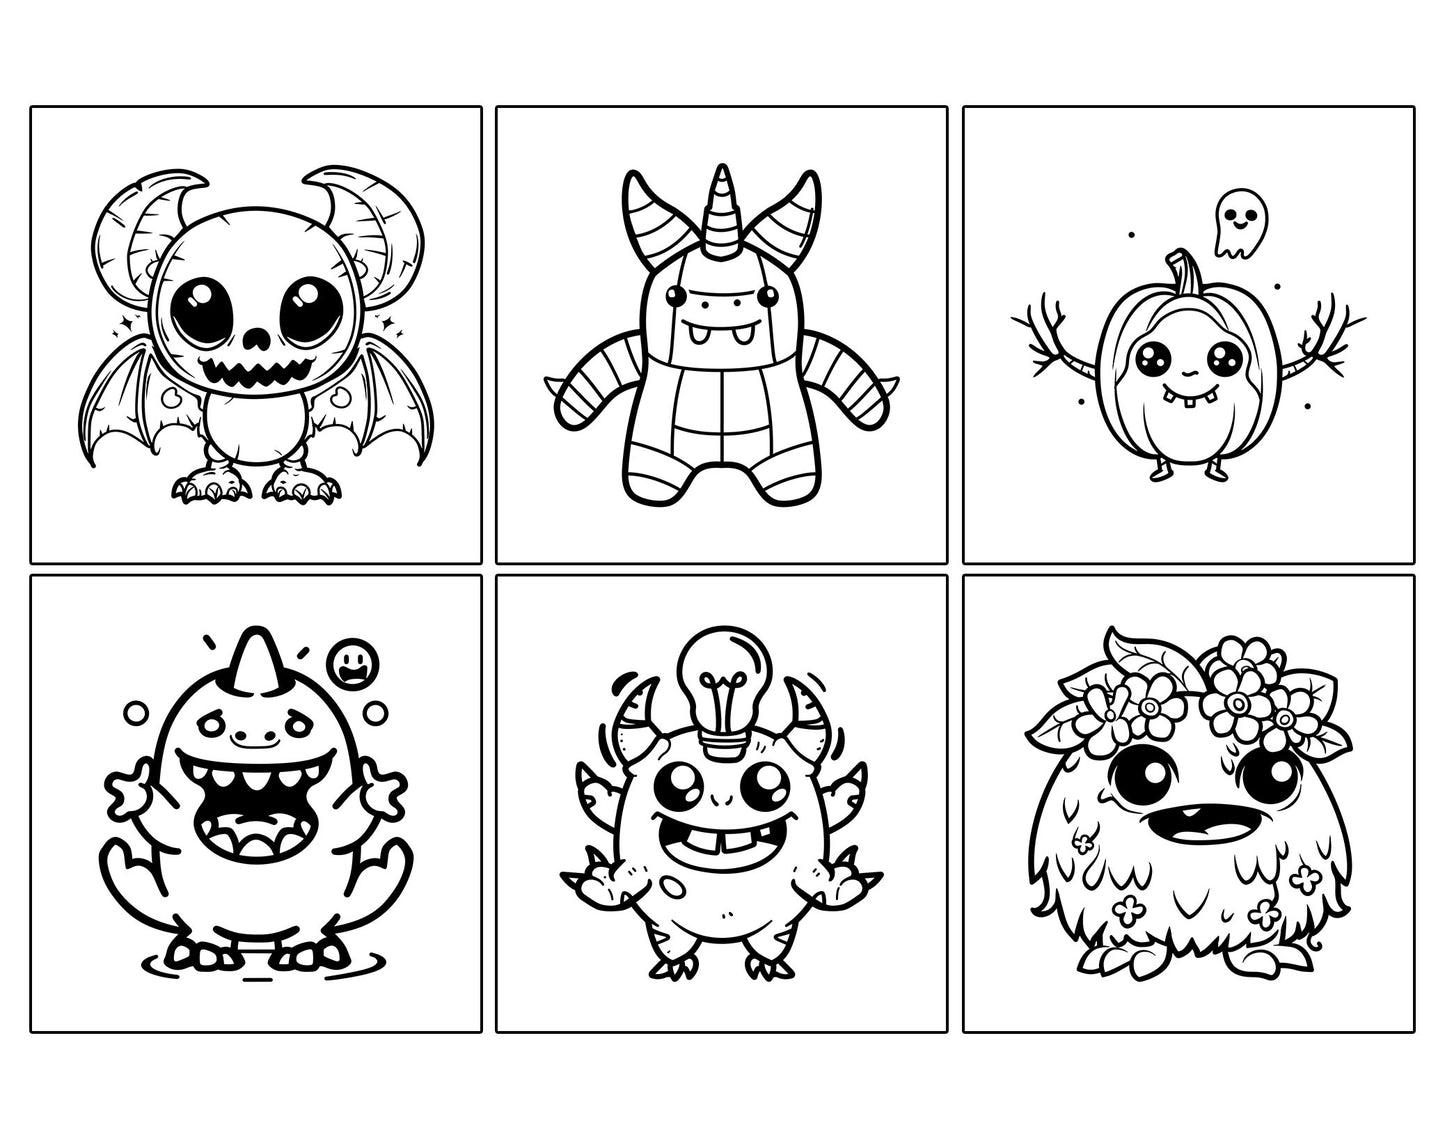 60 Kawaii Monsters Cute & Simple Coloring Pages - Instant Download - Printable